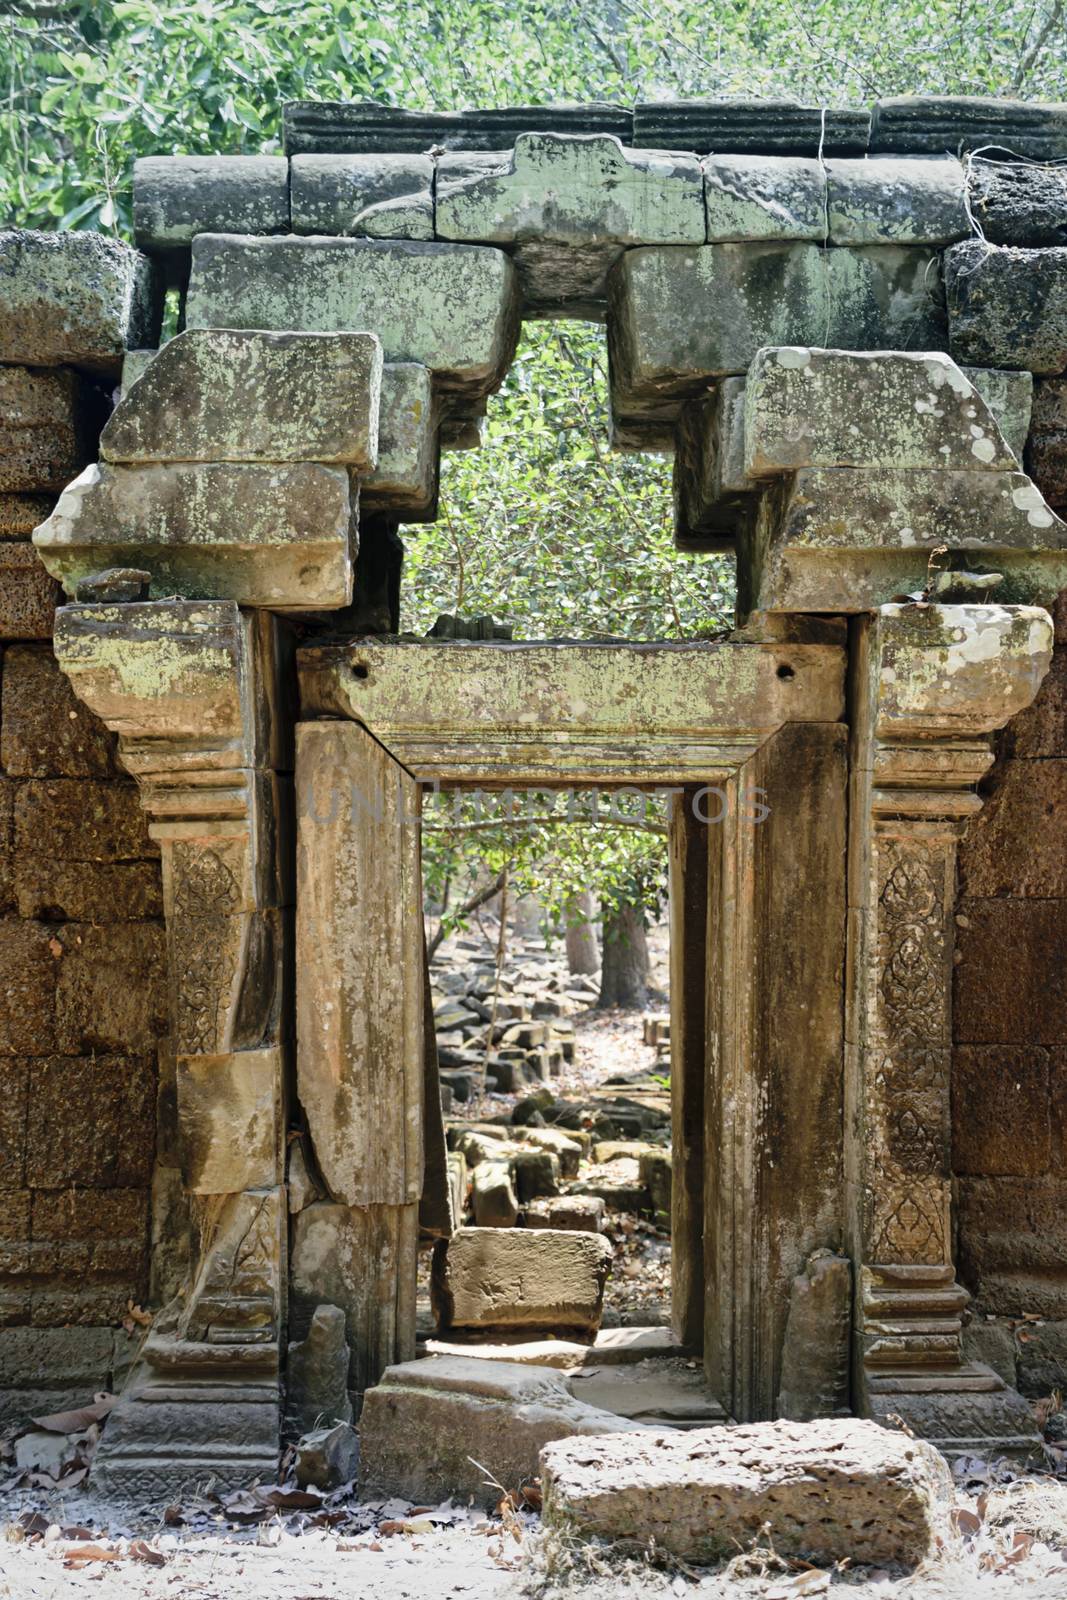 Angkor Thom, Cambodia, March 2016: Minor structures in the  gardens round the  Baphuon temple mountain. reconstructed by archaeologists over 16 years following the khmer rouge conflict